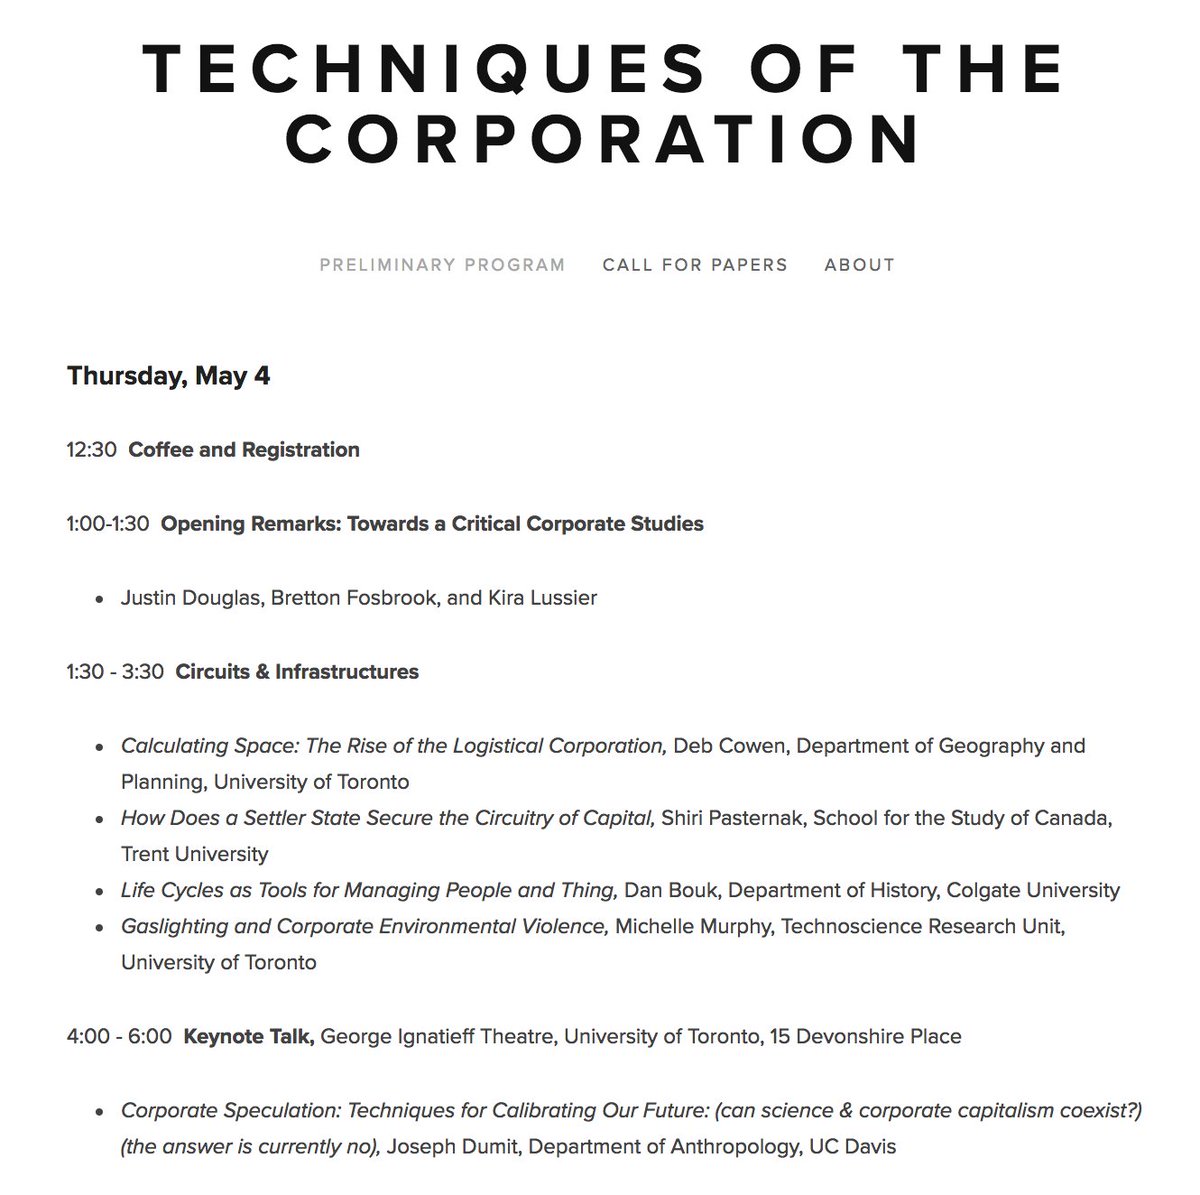 TECHNIQUES OF THE CORPORATION 4-6 May @UofT Preliminary Program: corporatetechniques.com/preliminary-pr… #corporatetechniques #historyofcapitalism #histsci